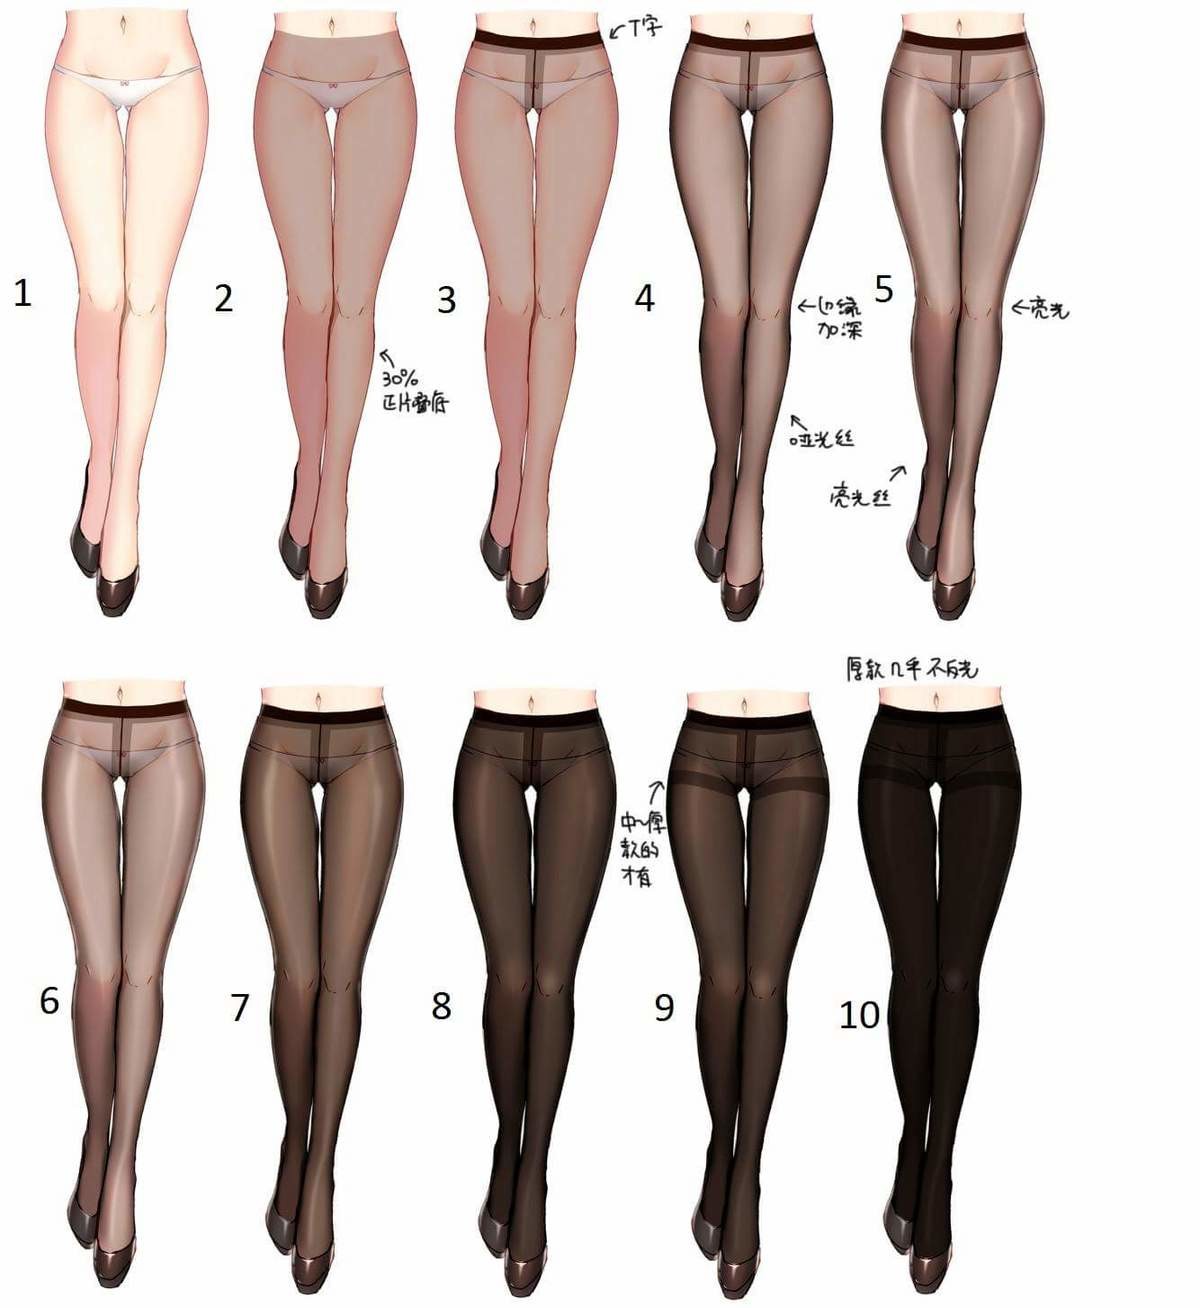 Tits pantyhose deluxe in